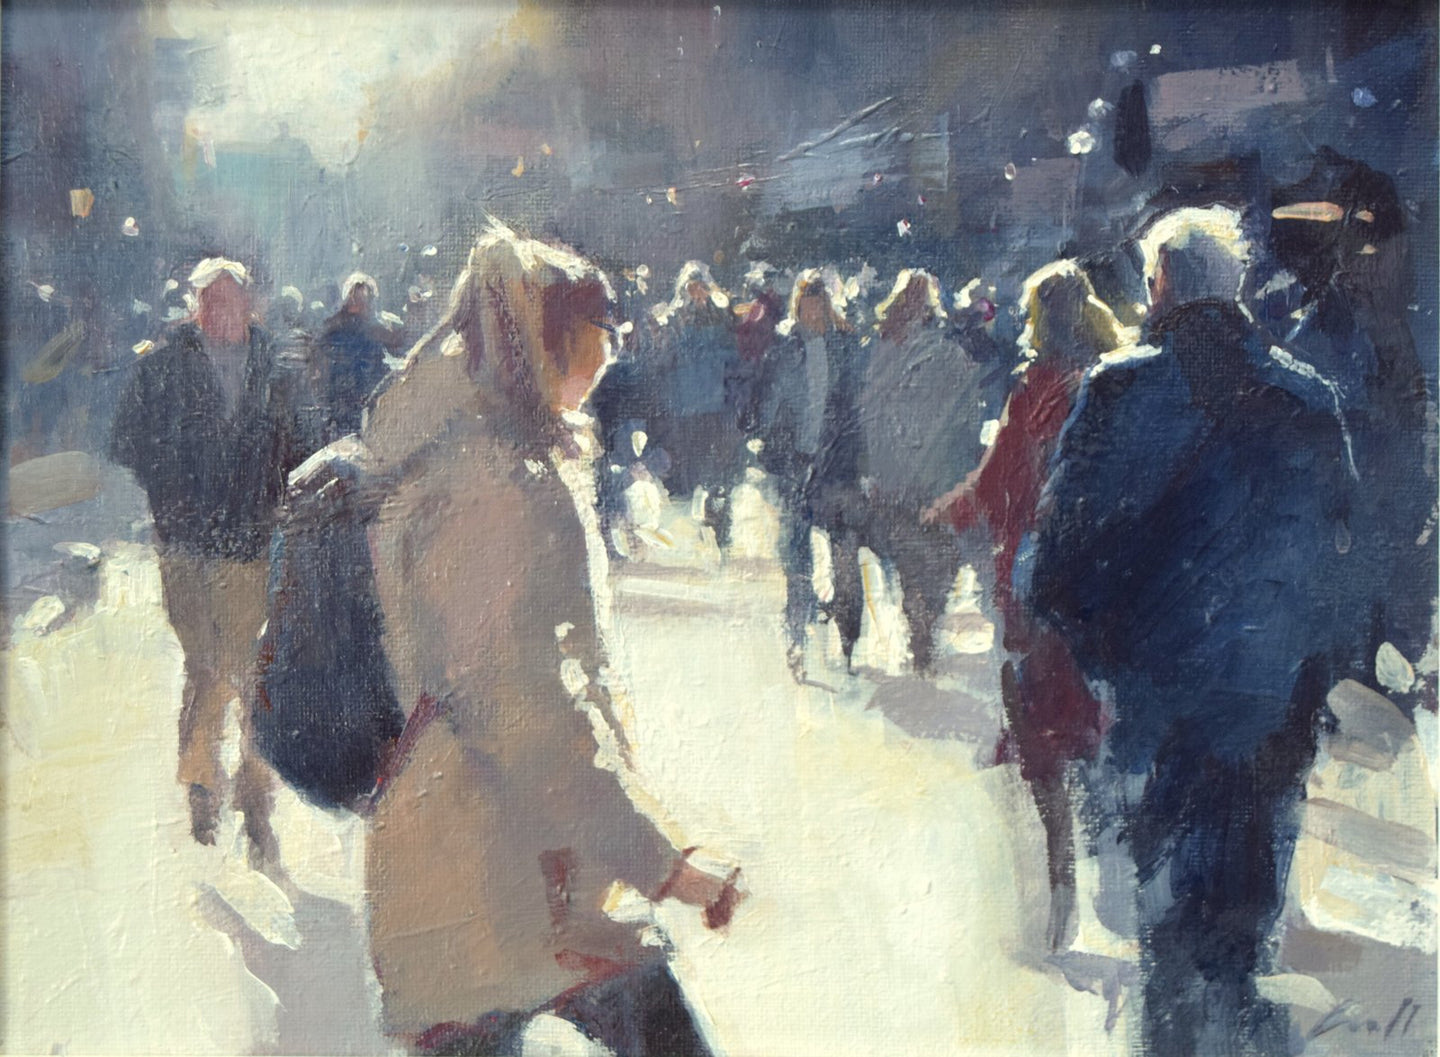 An acrylic painting by Carl Knibb, showing lots of shoppers in a crowded street, with one woman in the foreground moving across the street, against the up and down flow of the other pedestrians, painted into the sunlight, with halos of light around the figures.